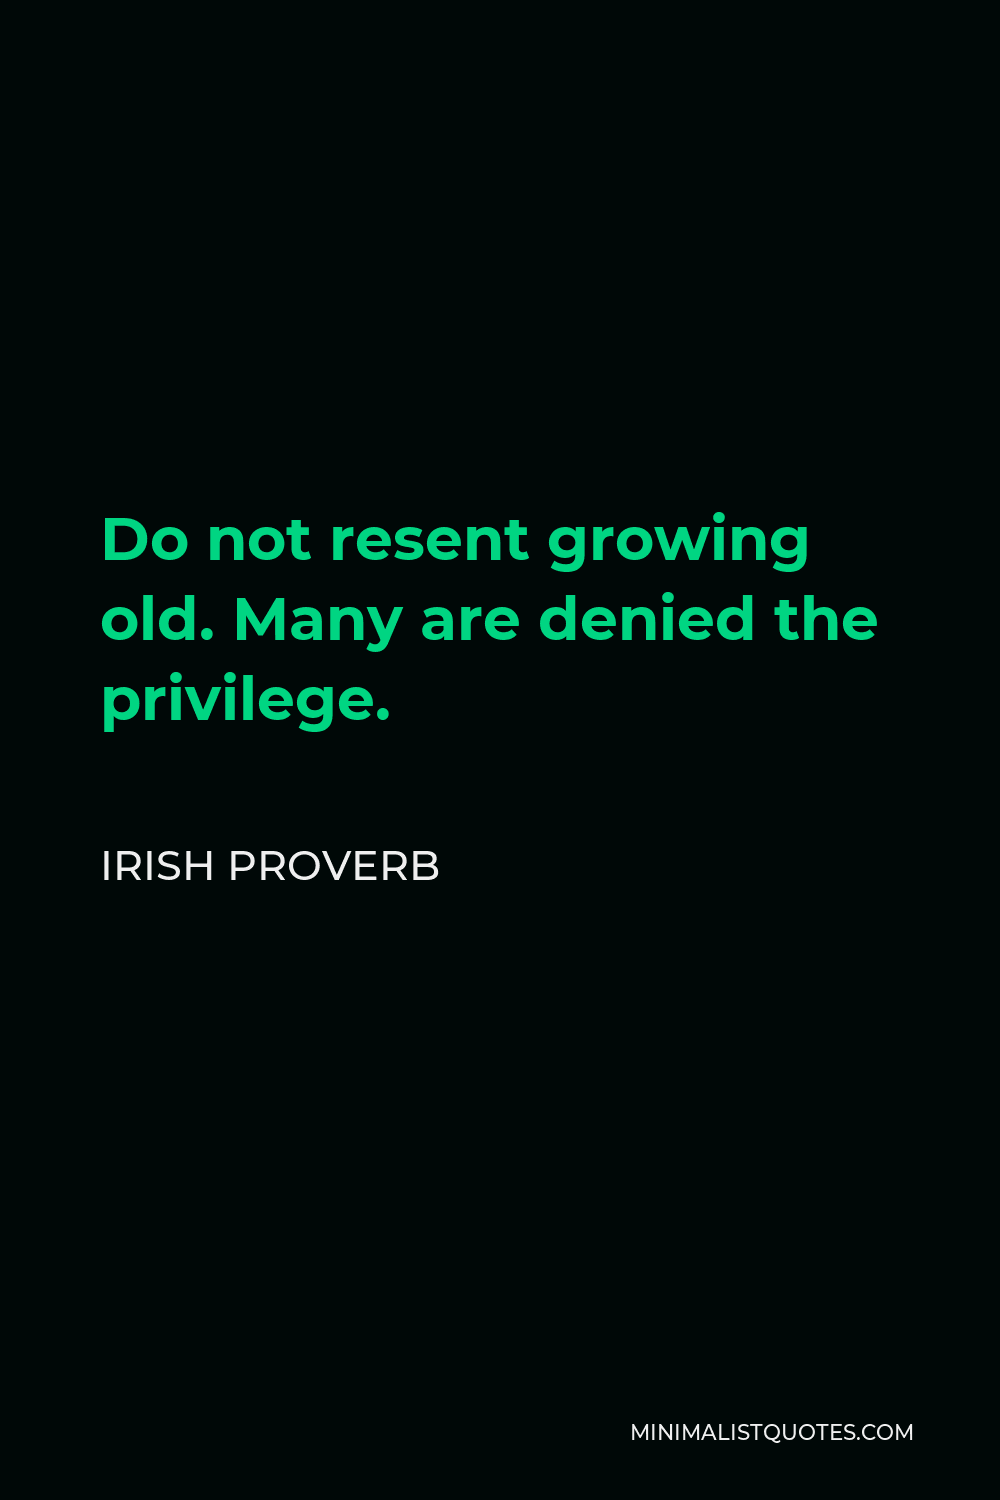 Irish Proverb Quote - Do not resent growing old. Many are denied the privilege.